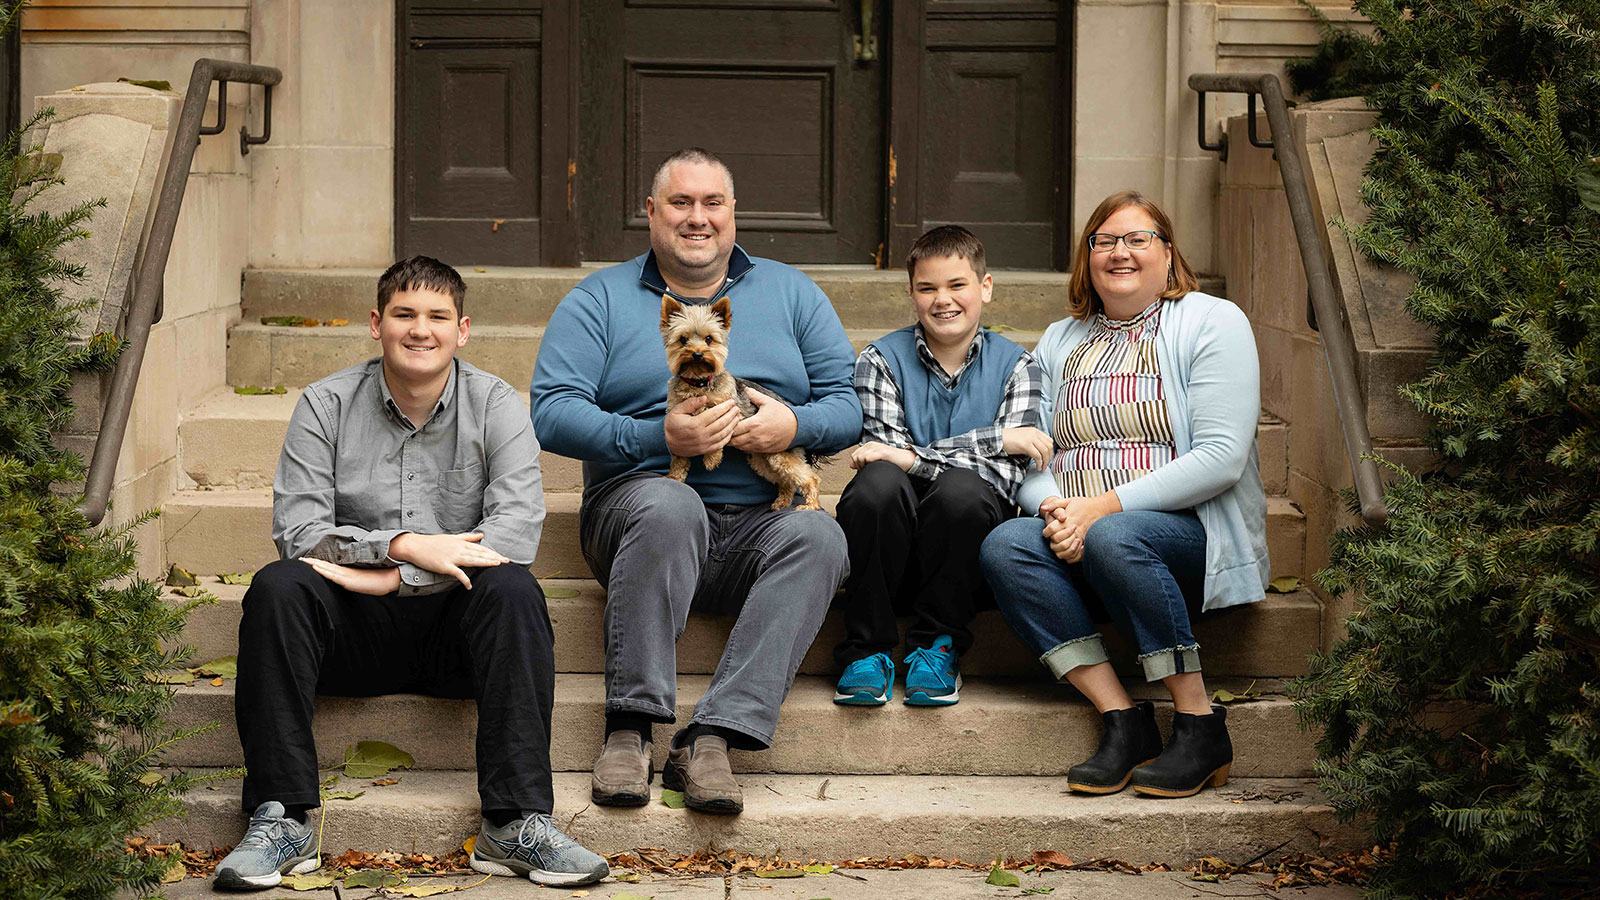 Shannon and family - from Left to Right: Sam, George, Max (the dog), Alden and Shannon